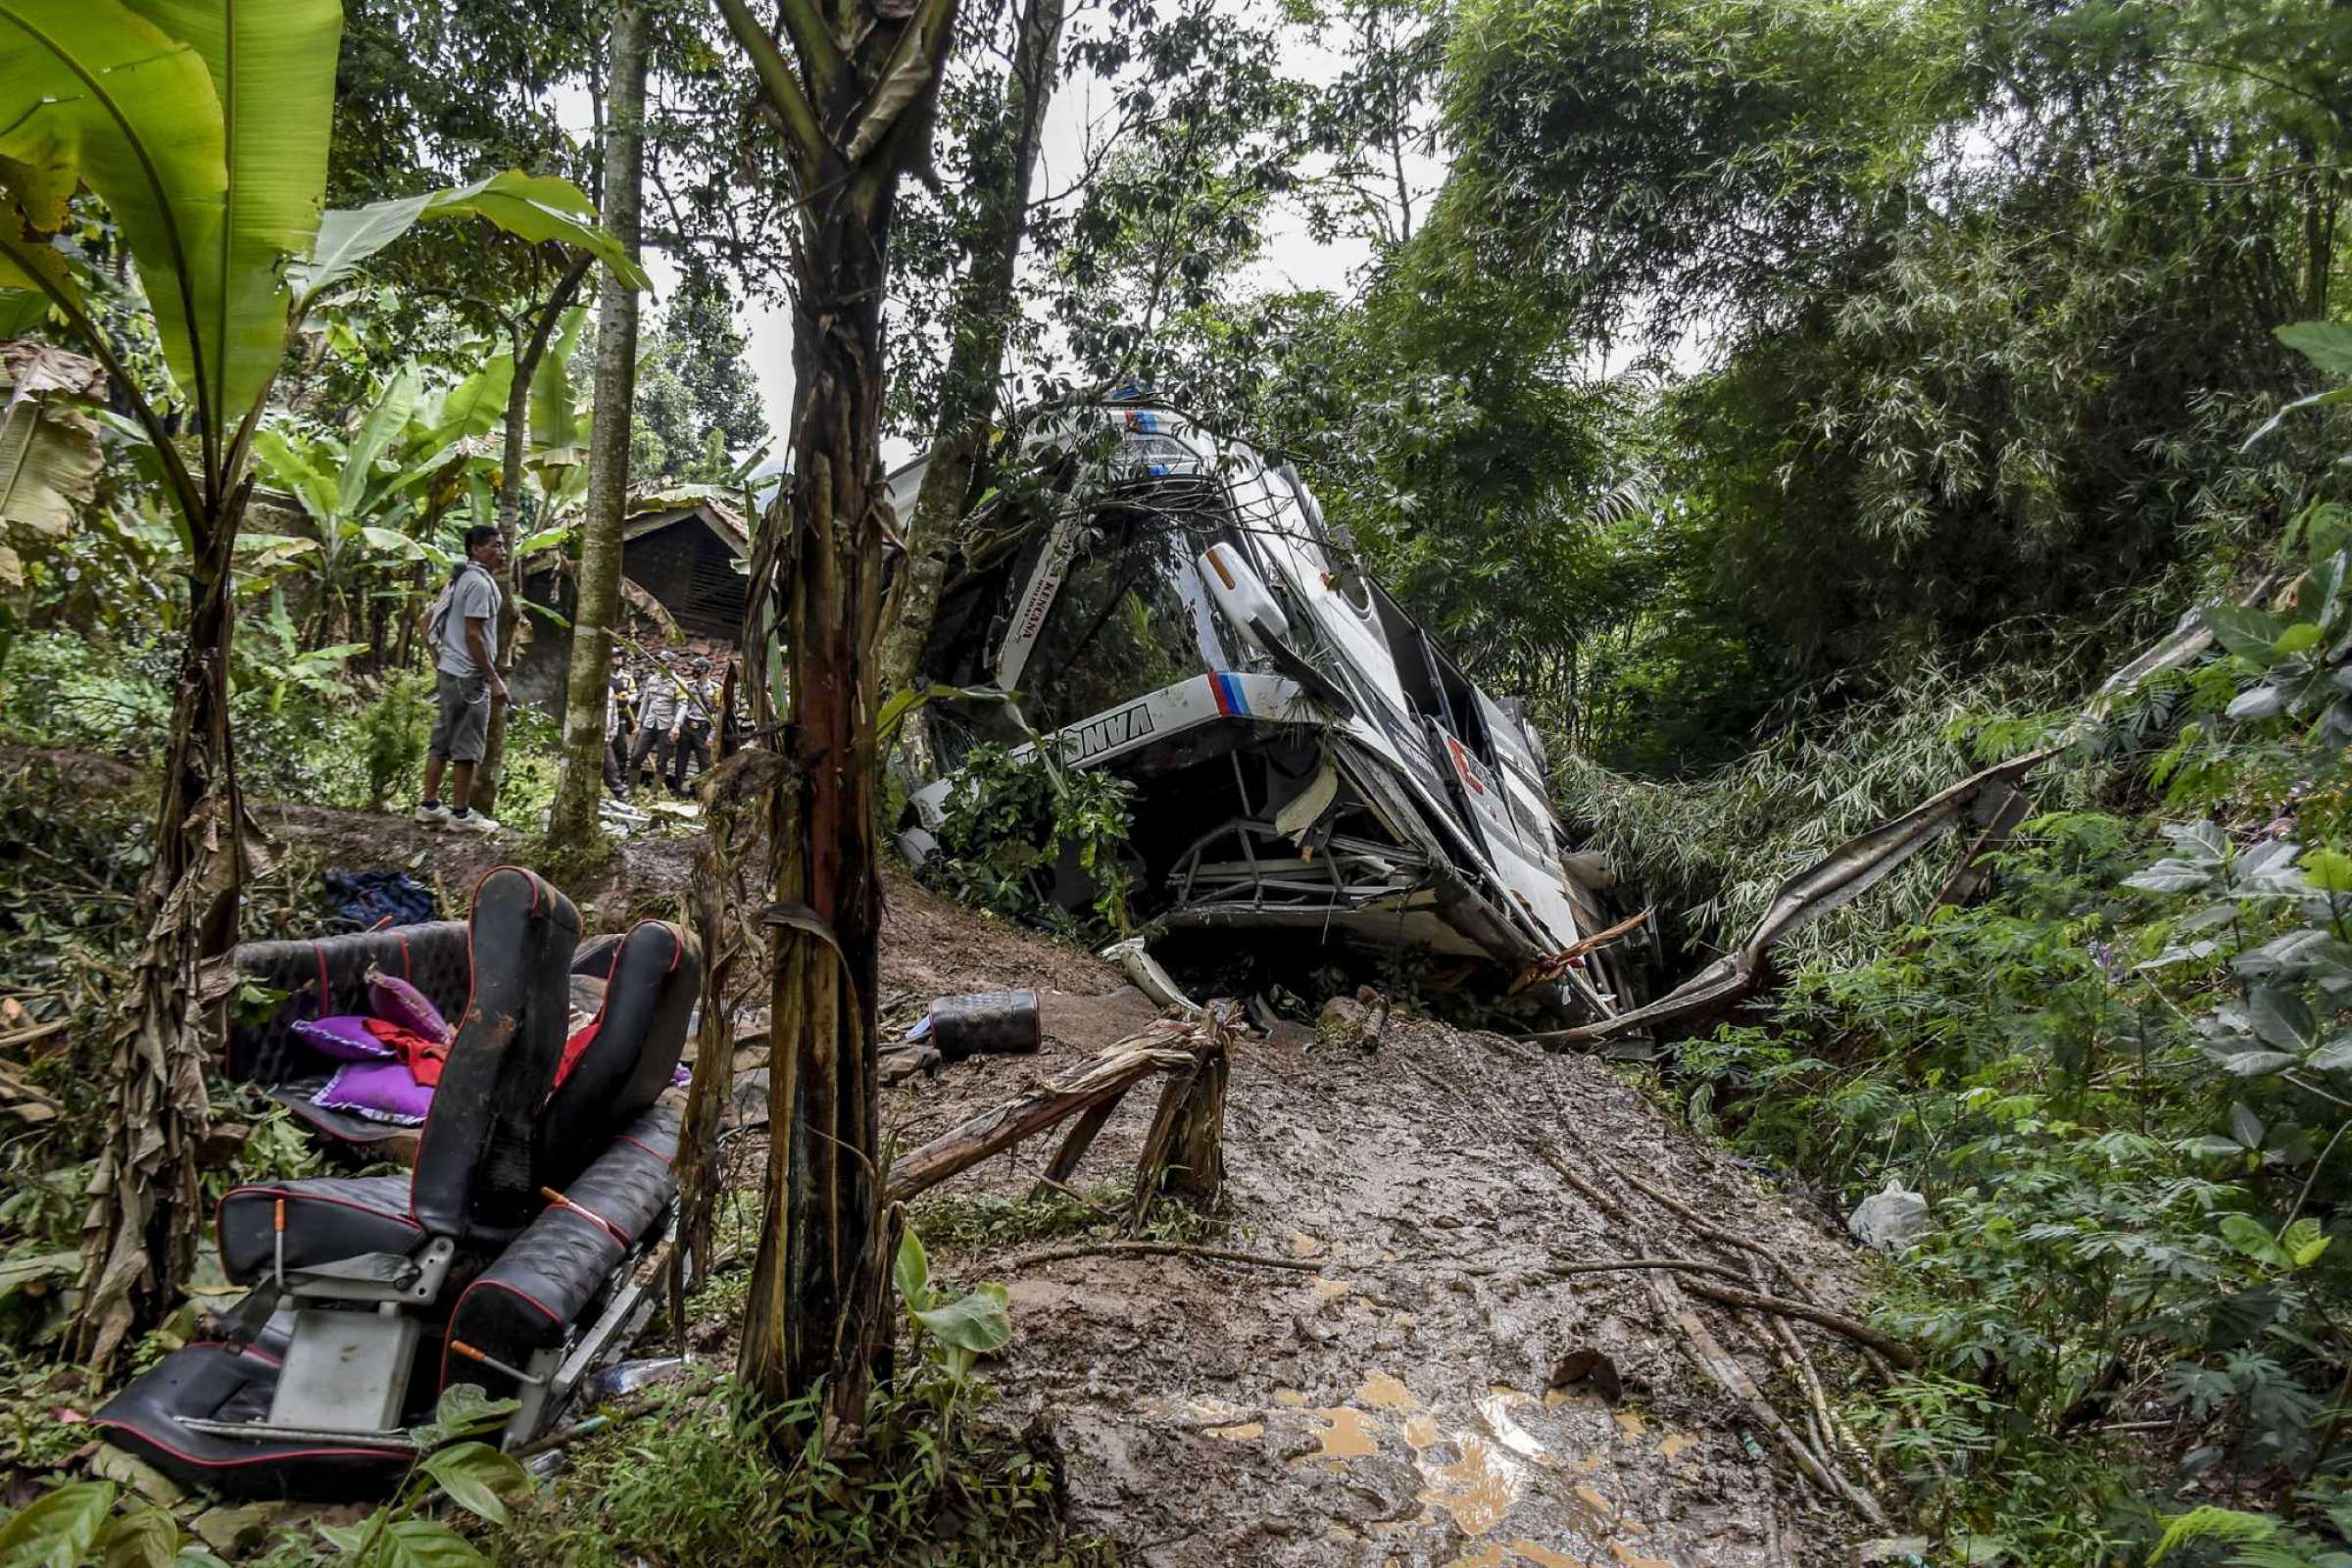 Bus Carrying School Children Plunges into Ravine in Indonesia